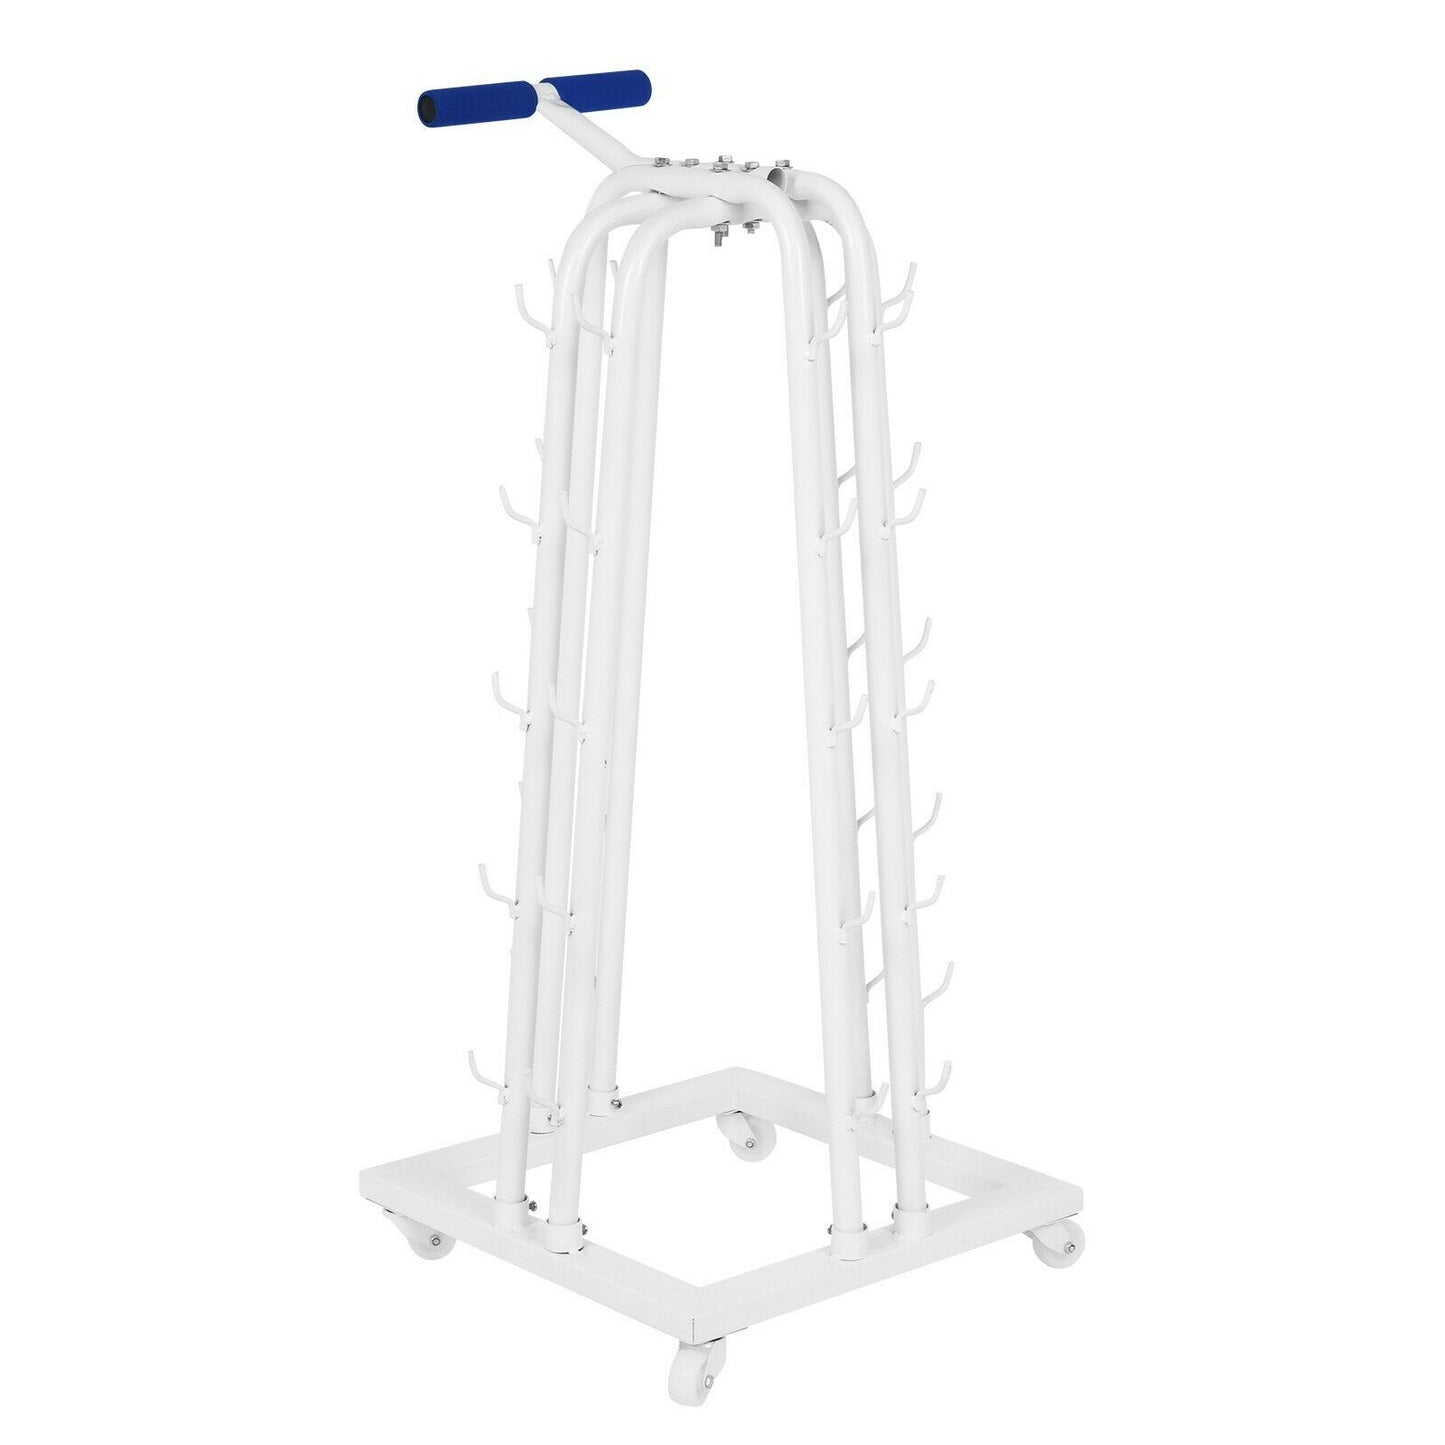 Portable Weight Dumbbell Holder Gym Storage Rack Stand